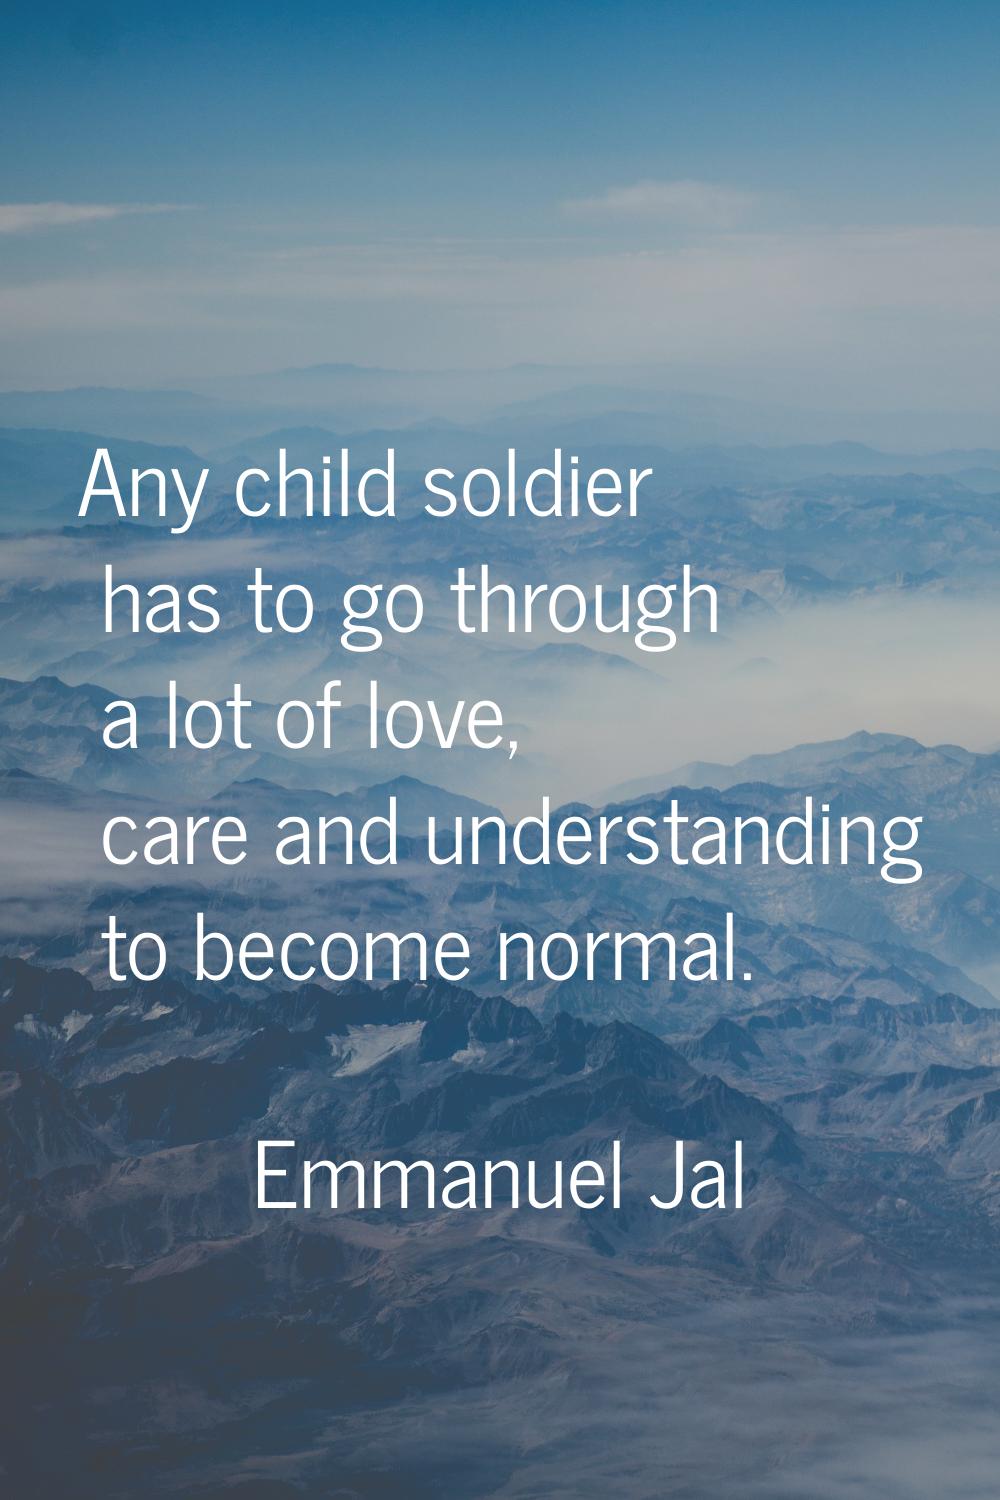 Any child soldier has to go through a lot of love, care and understanding to become normal.